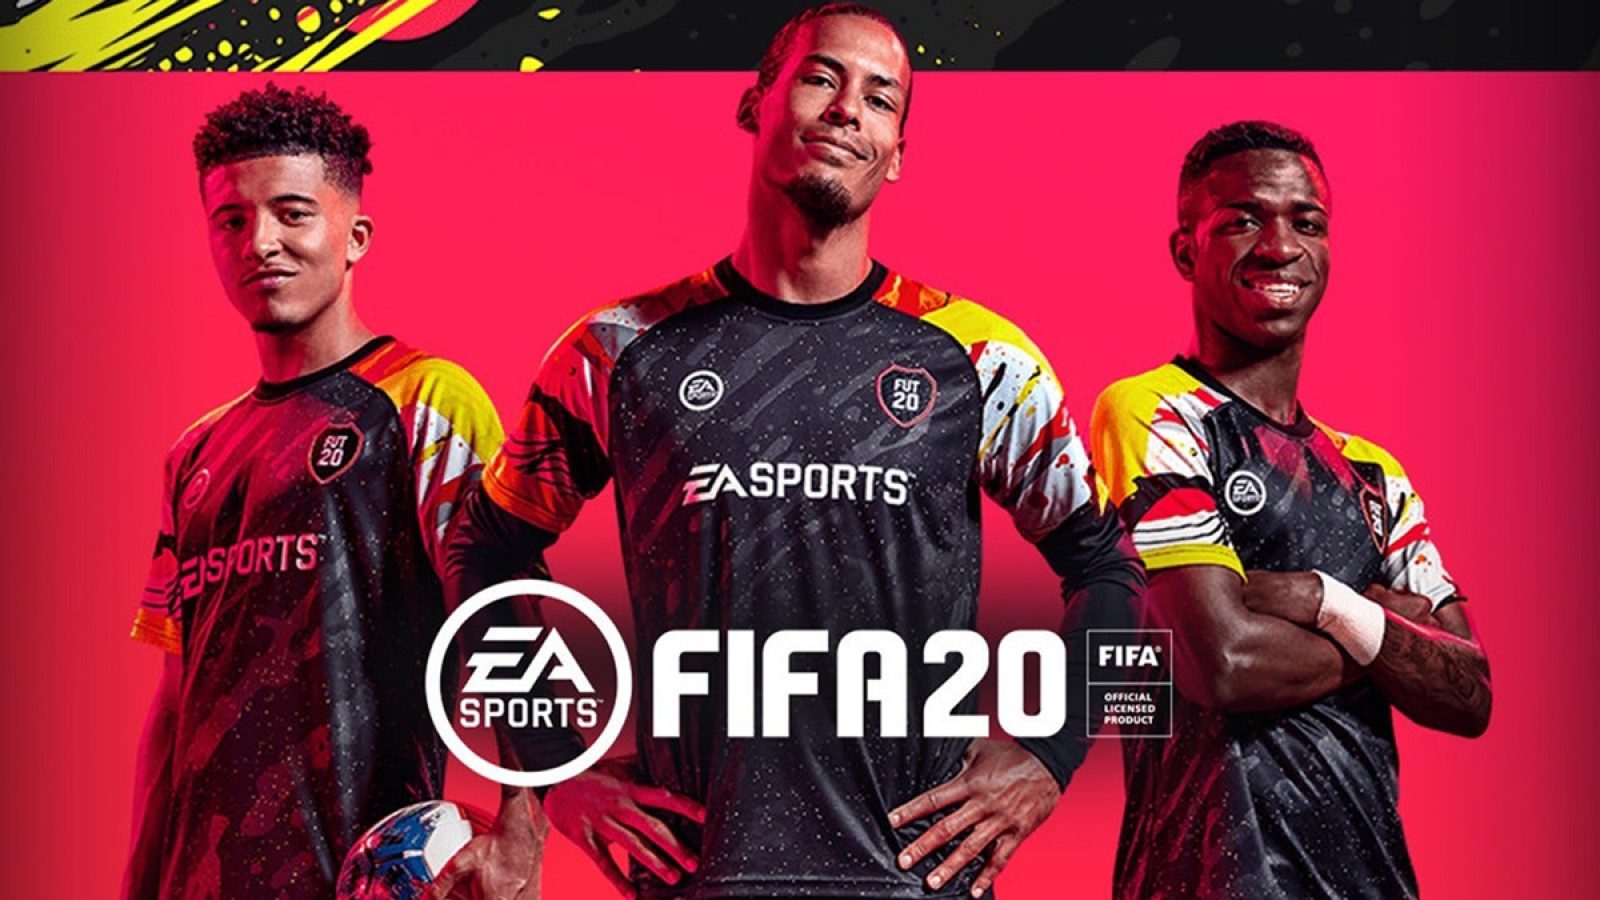 Download FIFA 20 PS4 ISO Free Full Version - Download Games PS4 ISO